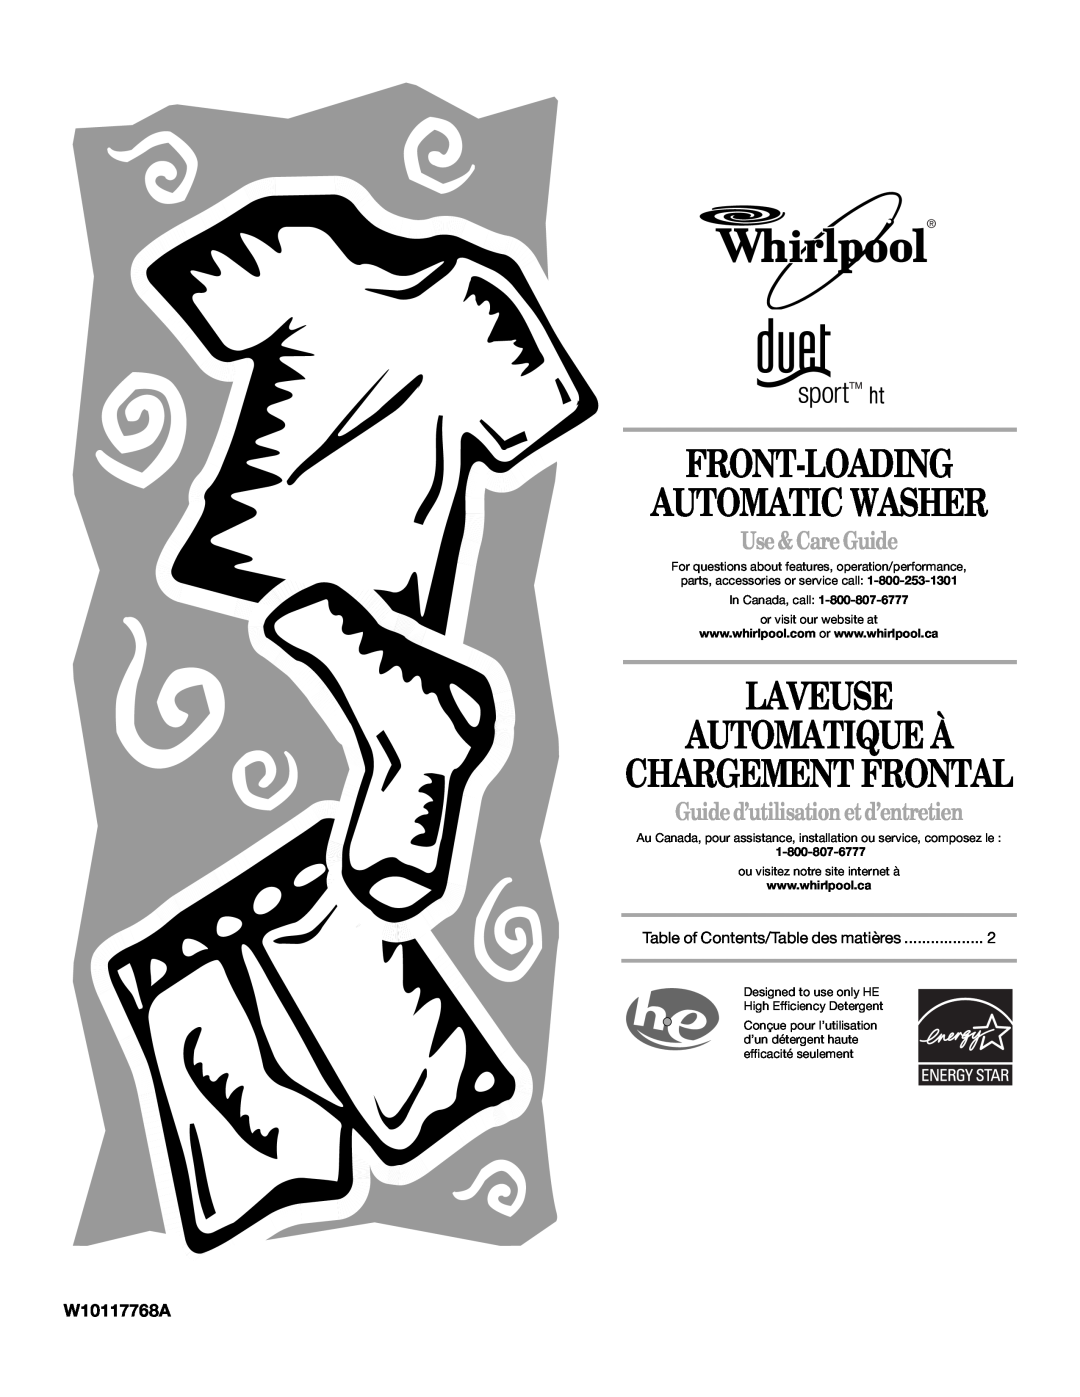 Whirlpool W10117768A manual Use& CareGuide, Guided’utilisation etd’entretien, Front-Loading Automatic Washer 